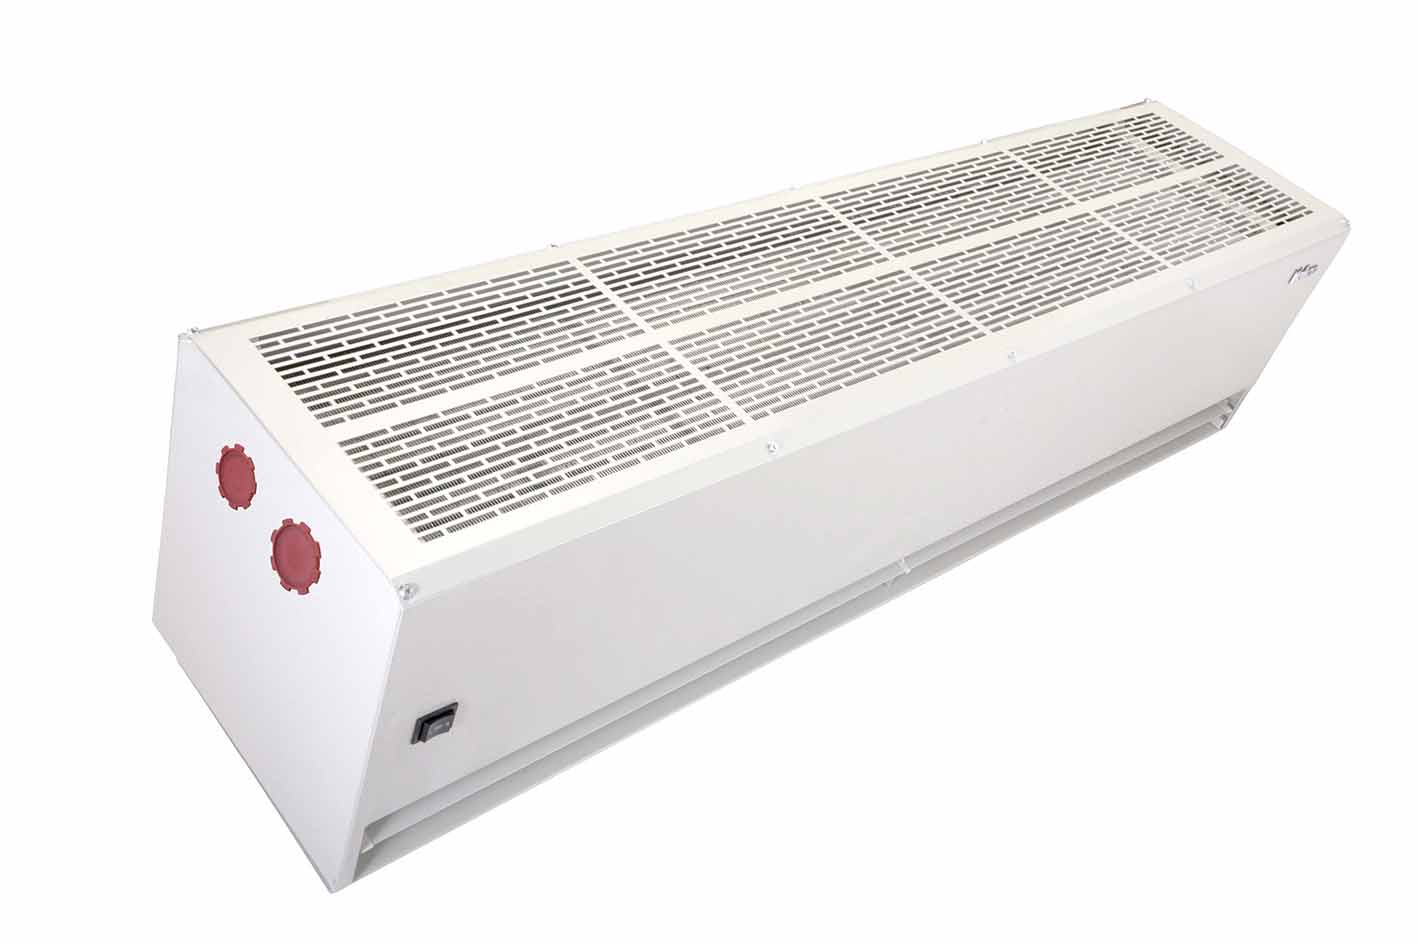 hvac with remote control hot water Air Curtain architectural